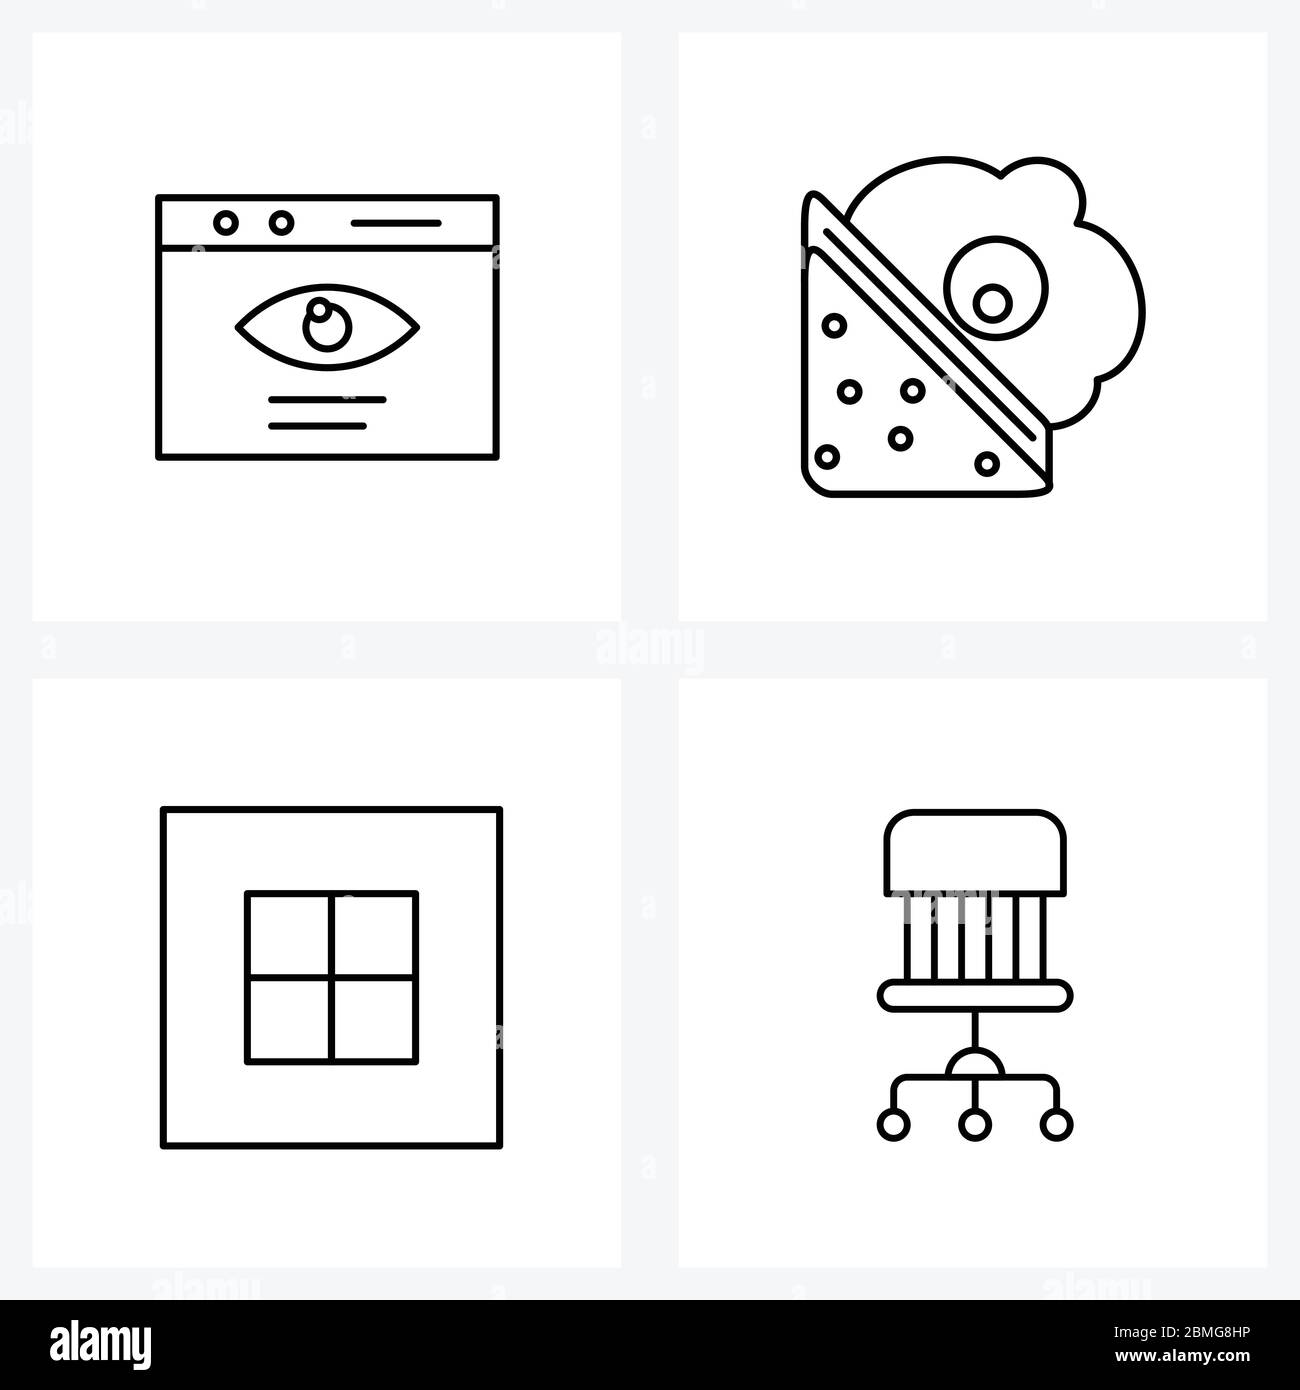 4 Editable Vector Line Icons and Modern Symbols of website, text, egg, bakery, chair Vector Illustration Stock Vector